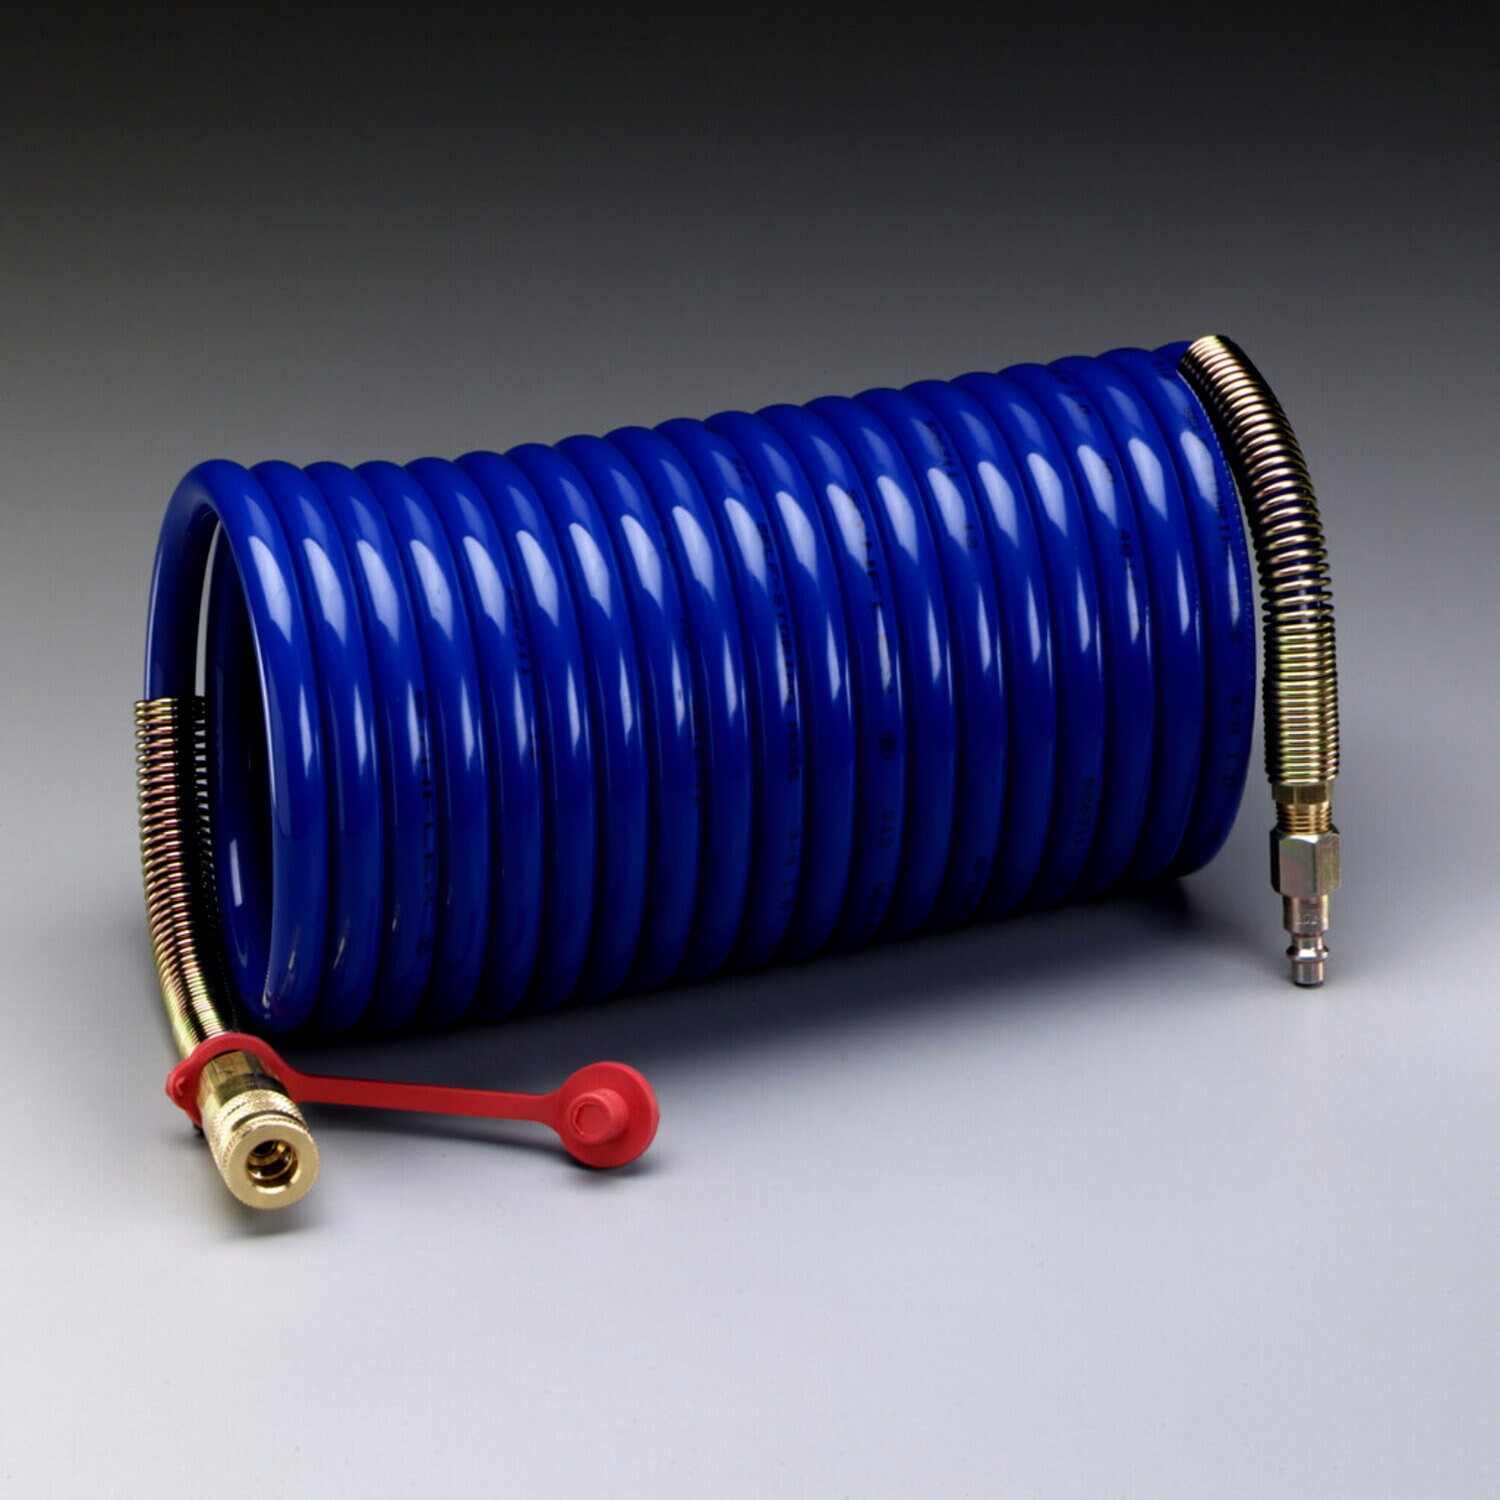 7010342203 - 3M Supplied Air Hose W-2929SR-50, 50 ft, 3/8 in ID, Schrader Fittings,
High Pressure, Coiled 1 EA/Case